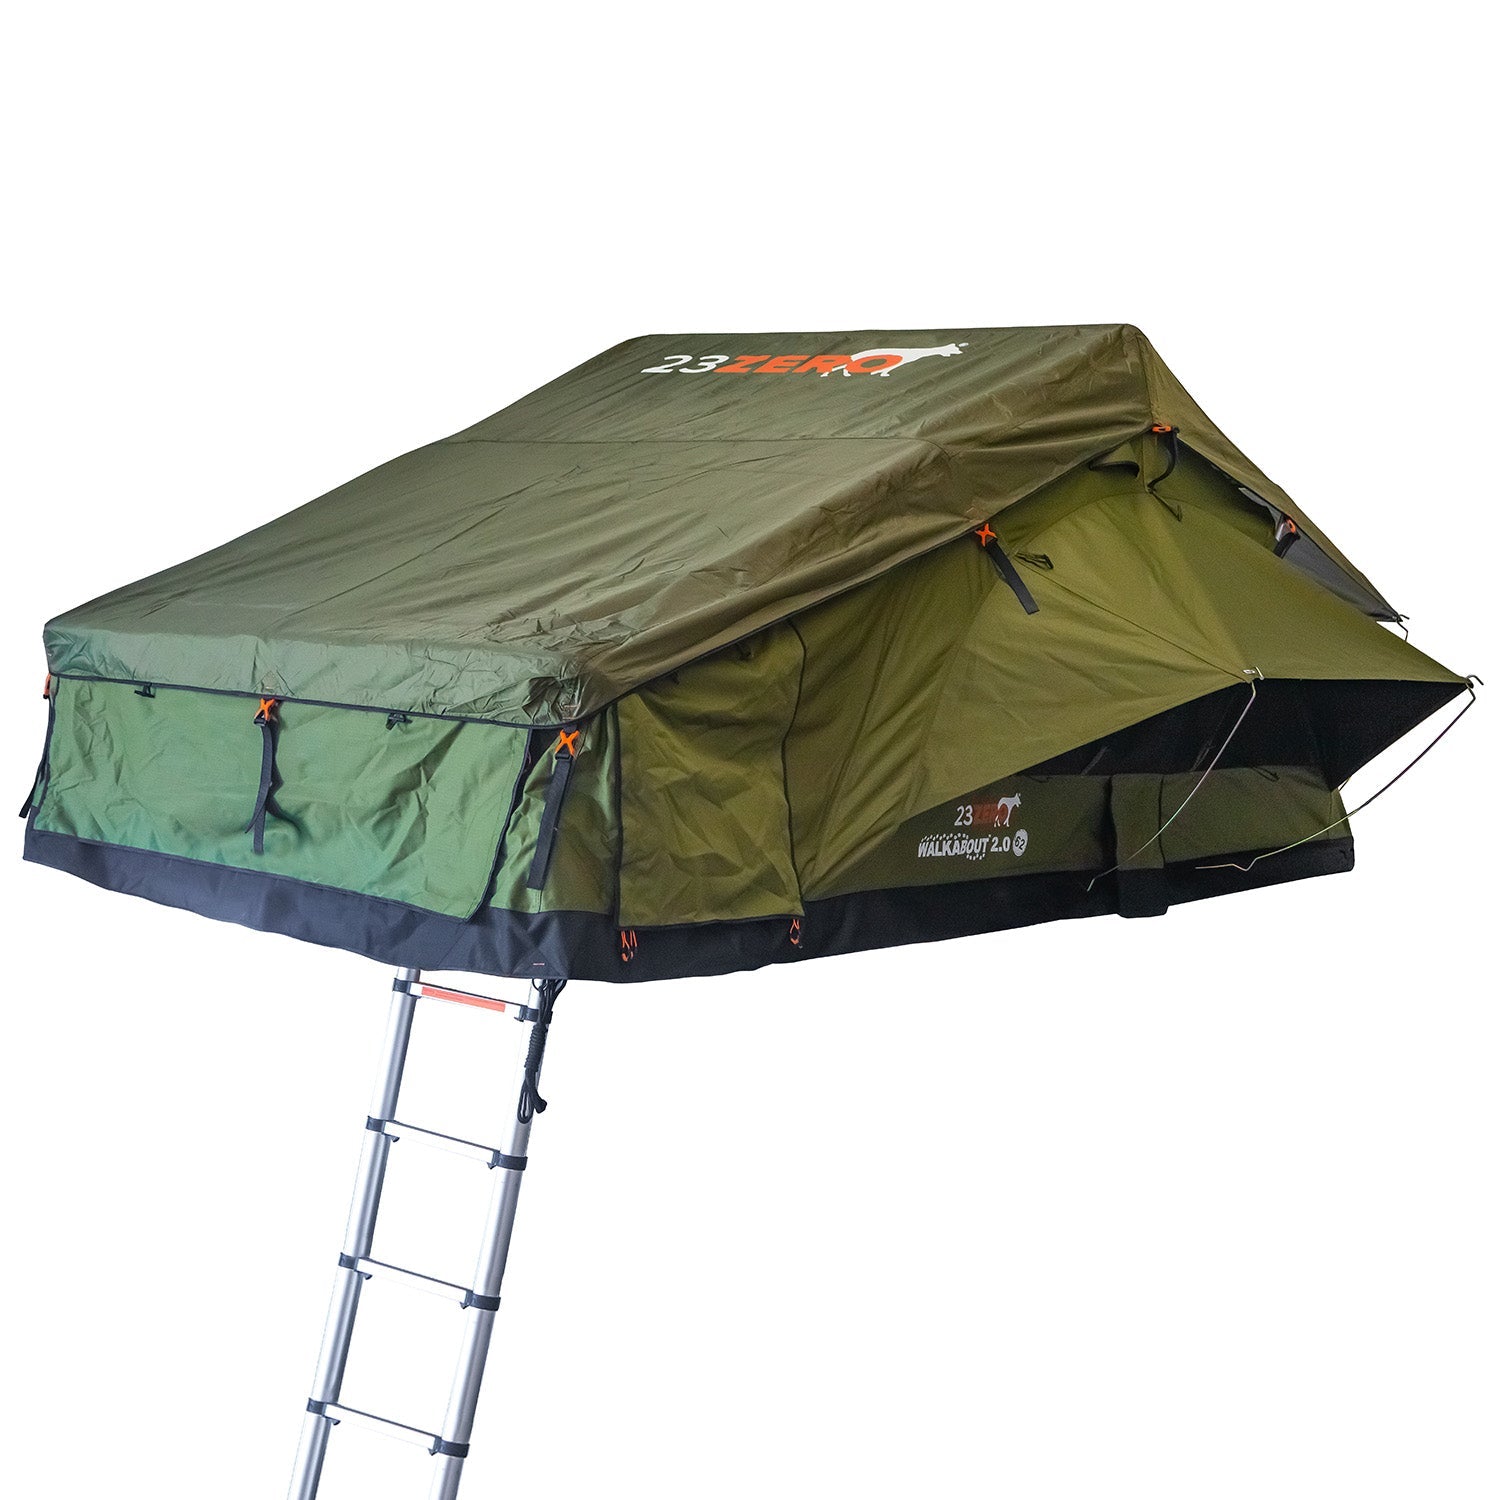 23zero-walkabout-56-2-0-soft-shell-roof-top-tent